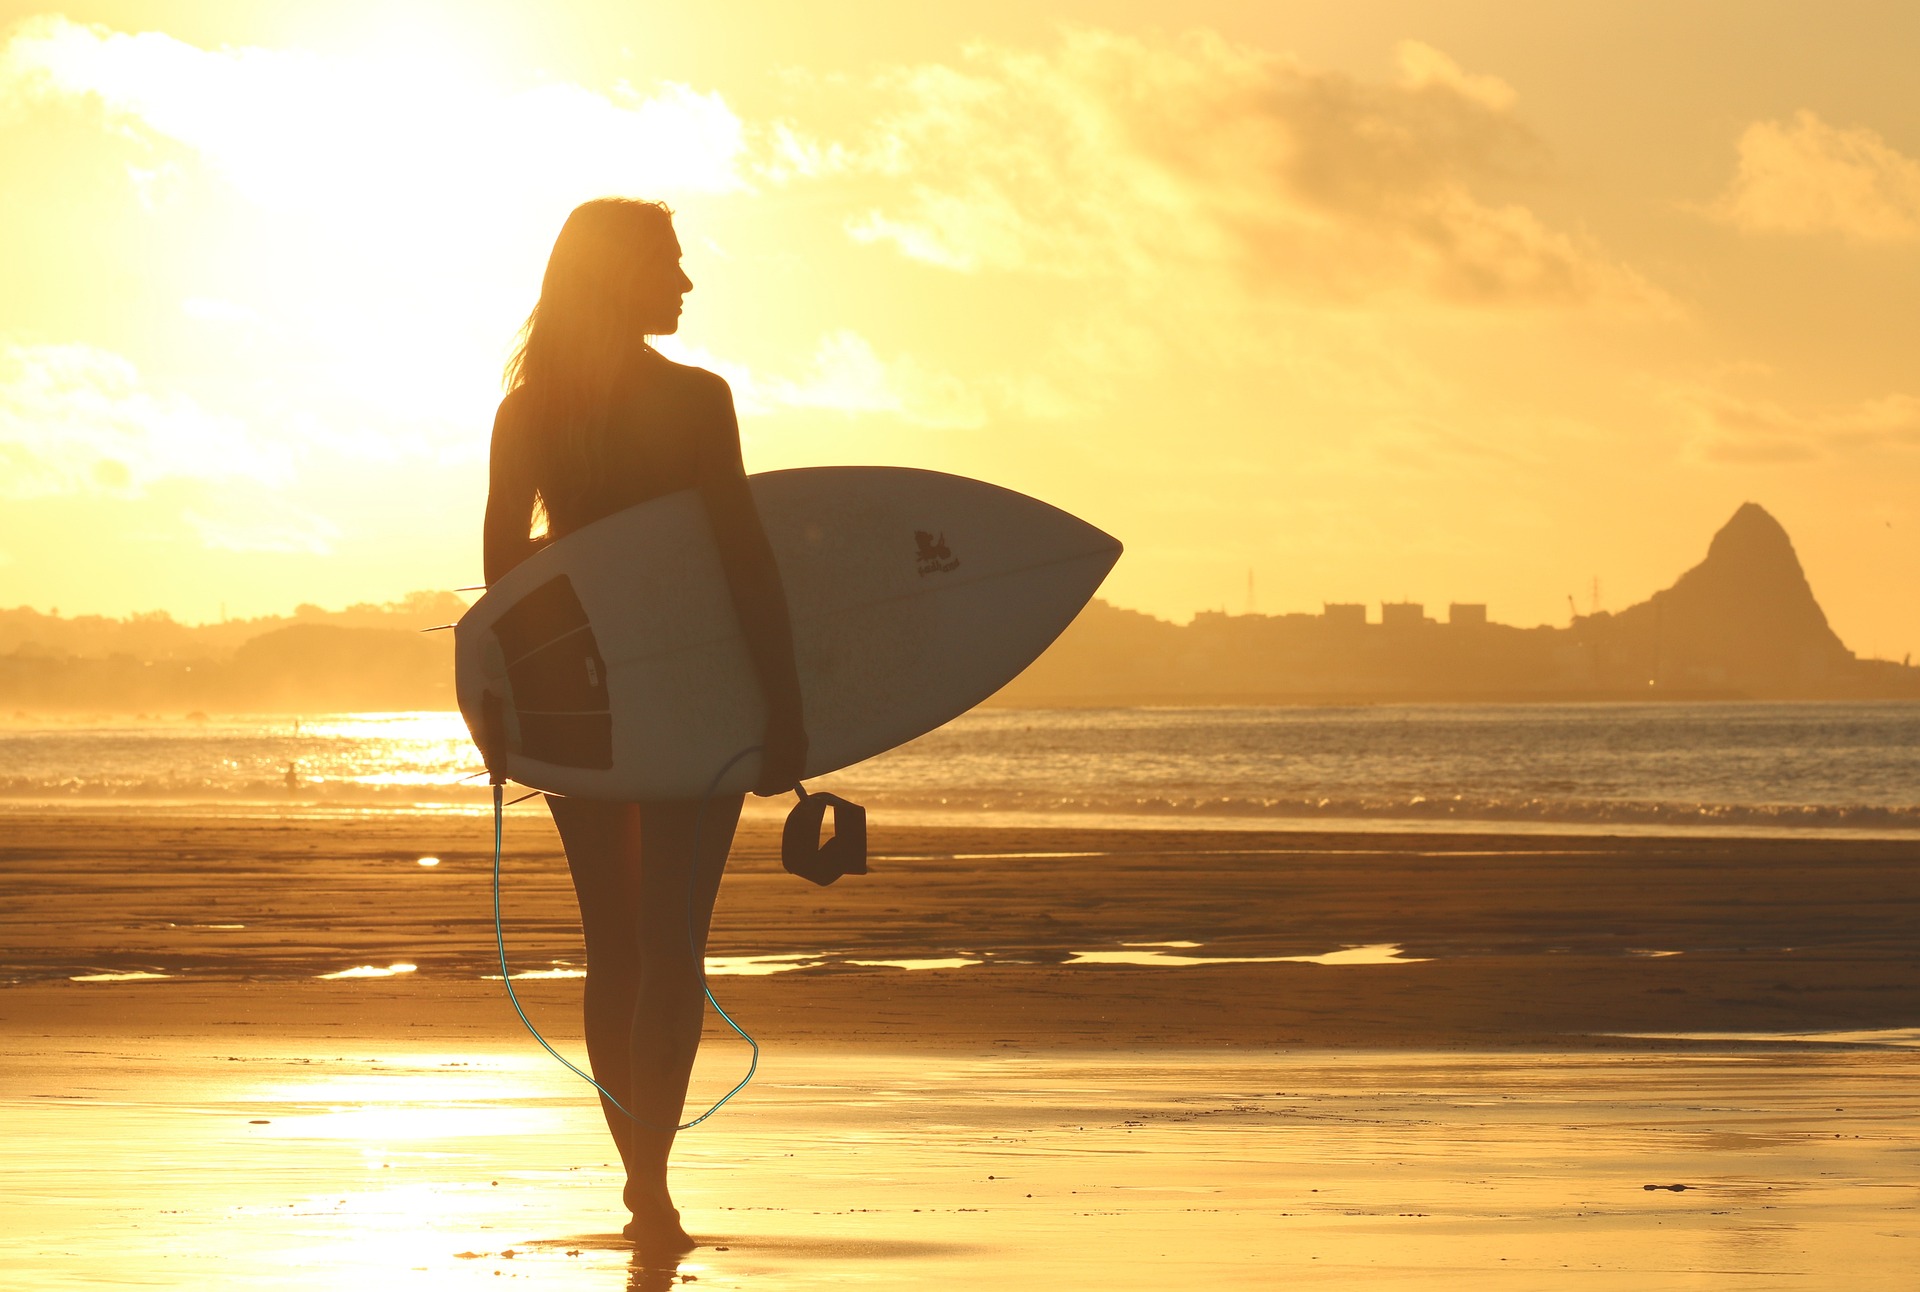 Self-care and depression involves being good to yourself, like this woman going surfing.